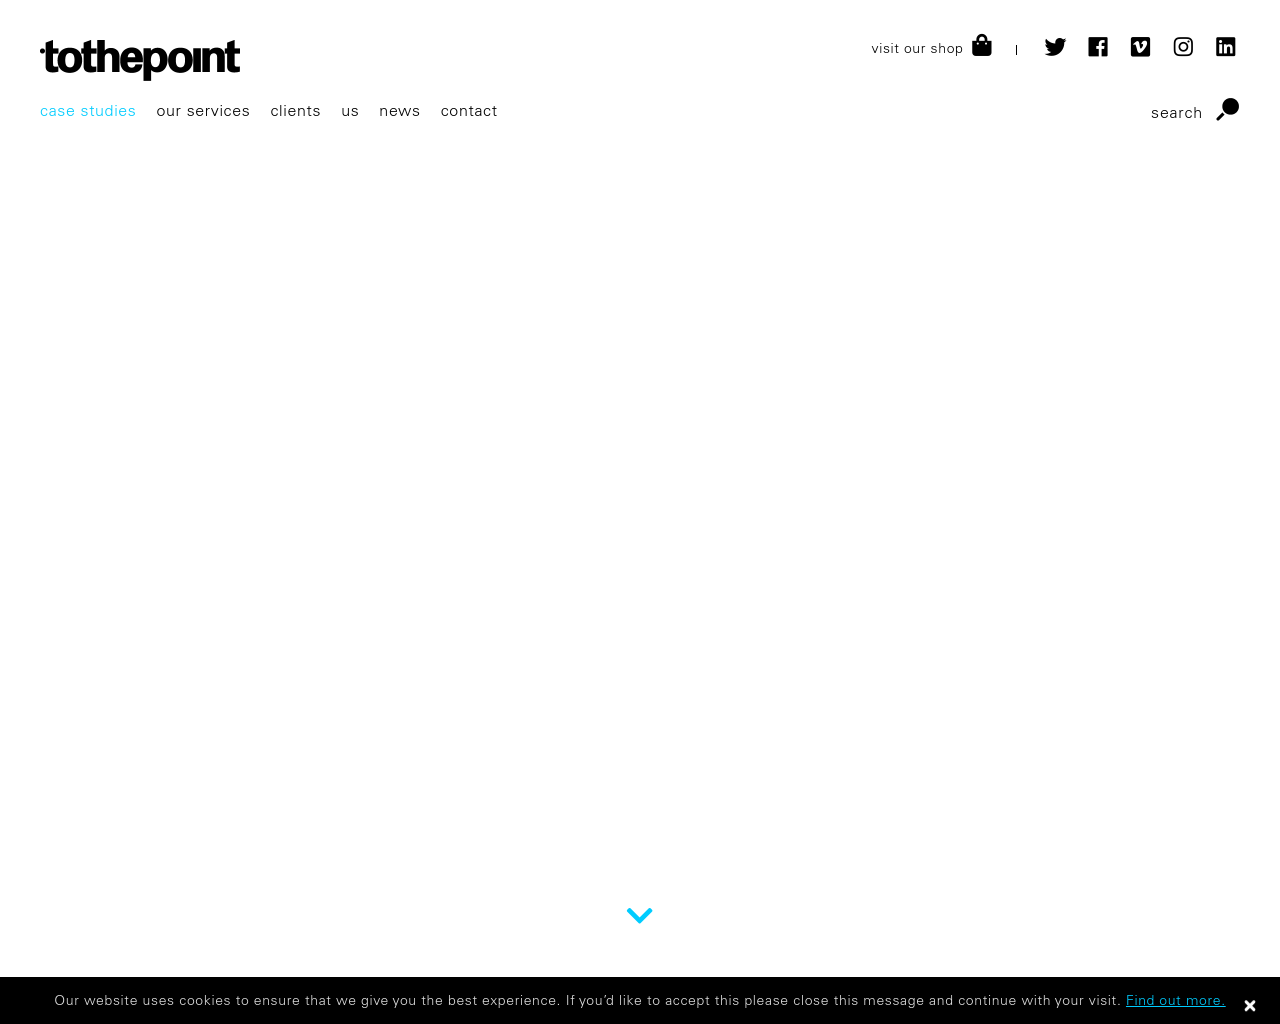 tothepoint.co.uk